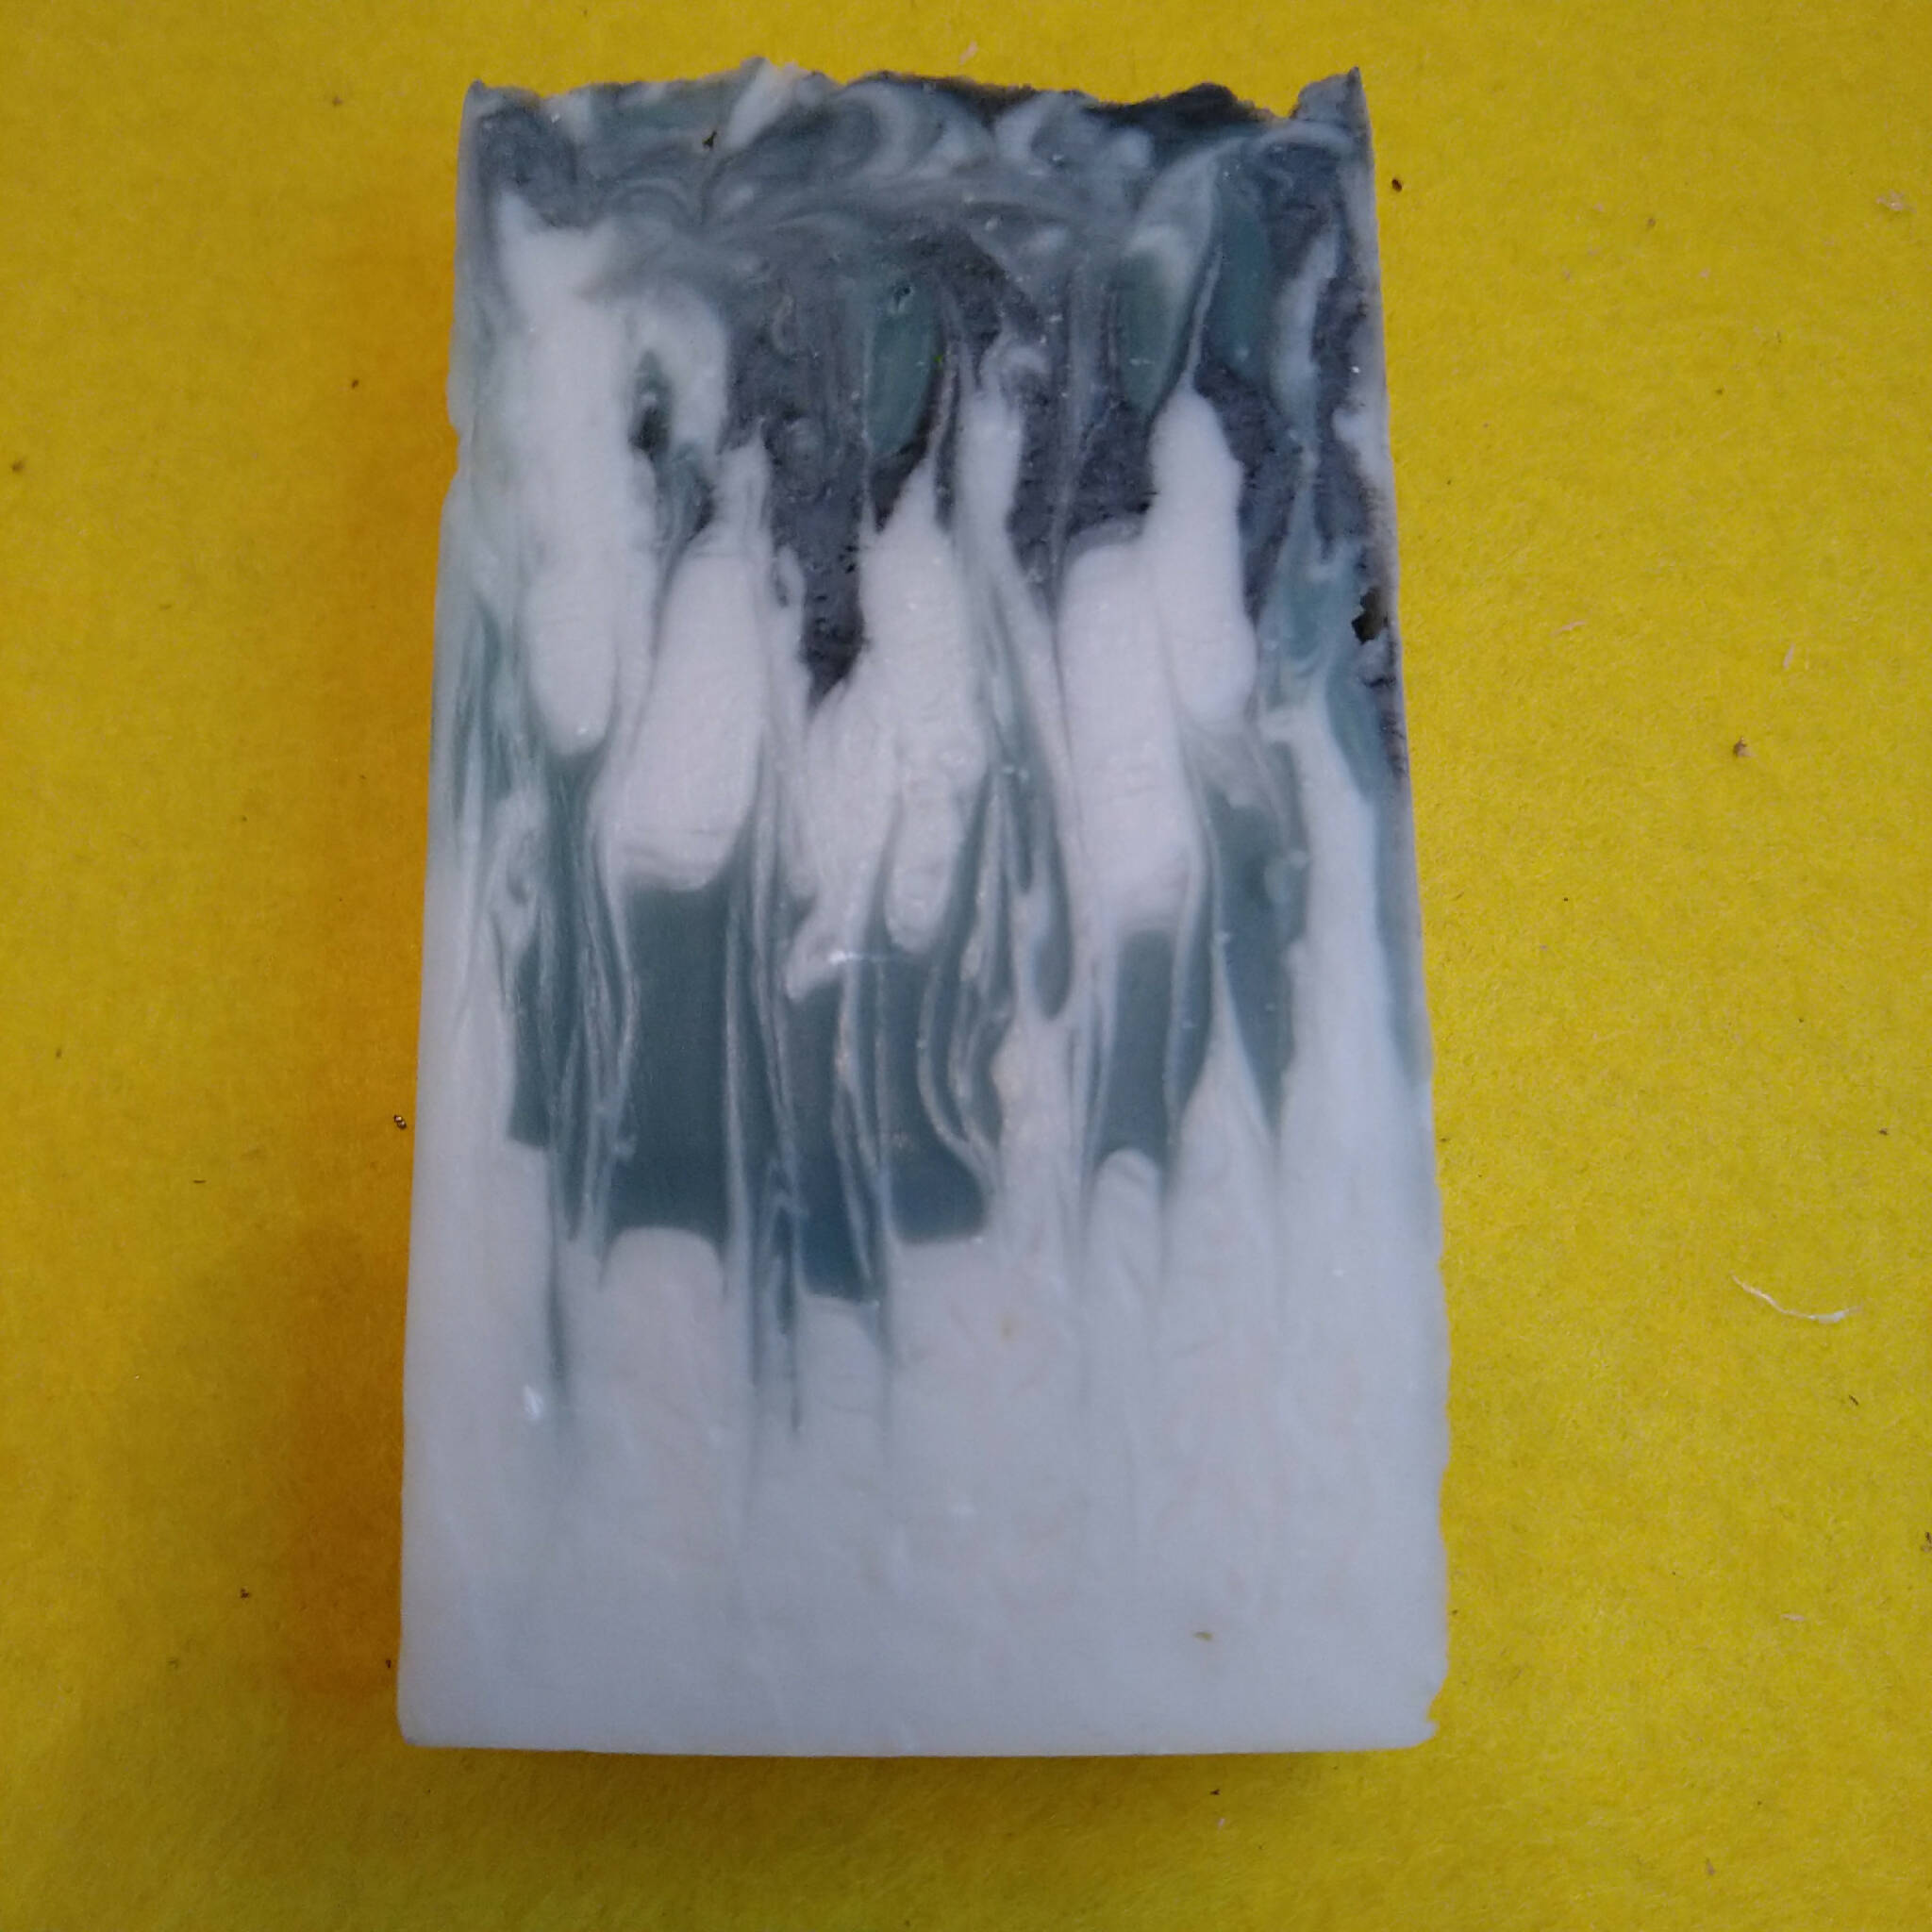 Herb Garden tall & skinny CP soap handmade - Rosemary, Lavender and Thyme essential oils